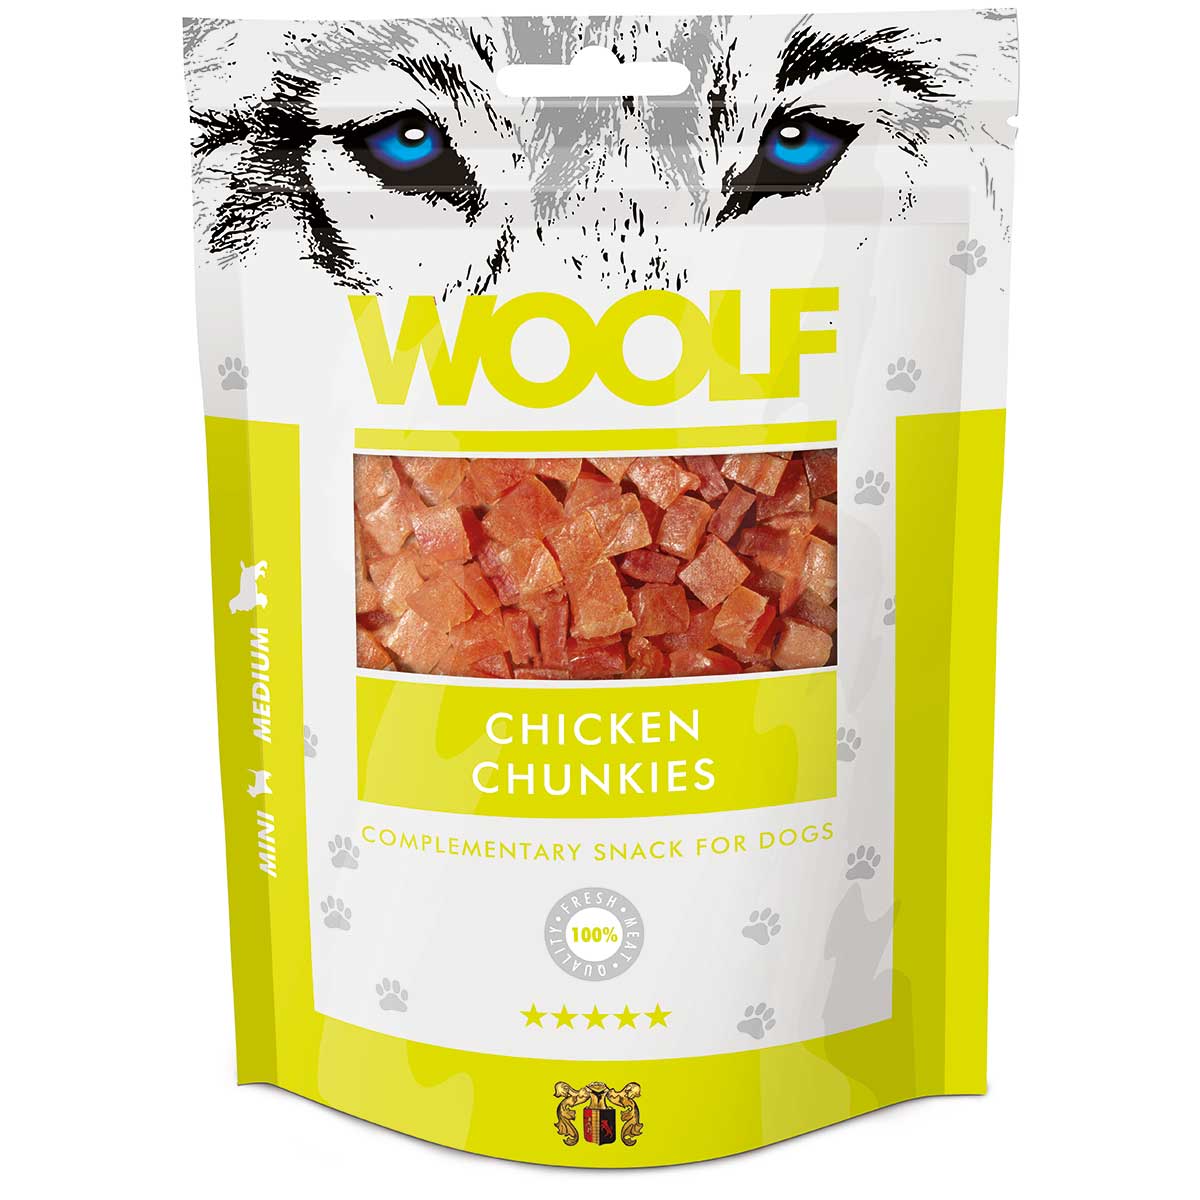 Woolf friandise pour chiens poulet Chunkies